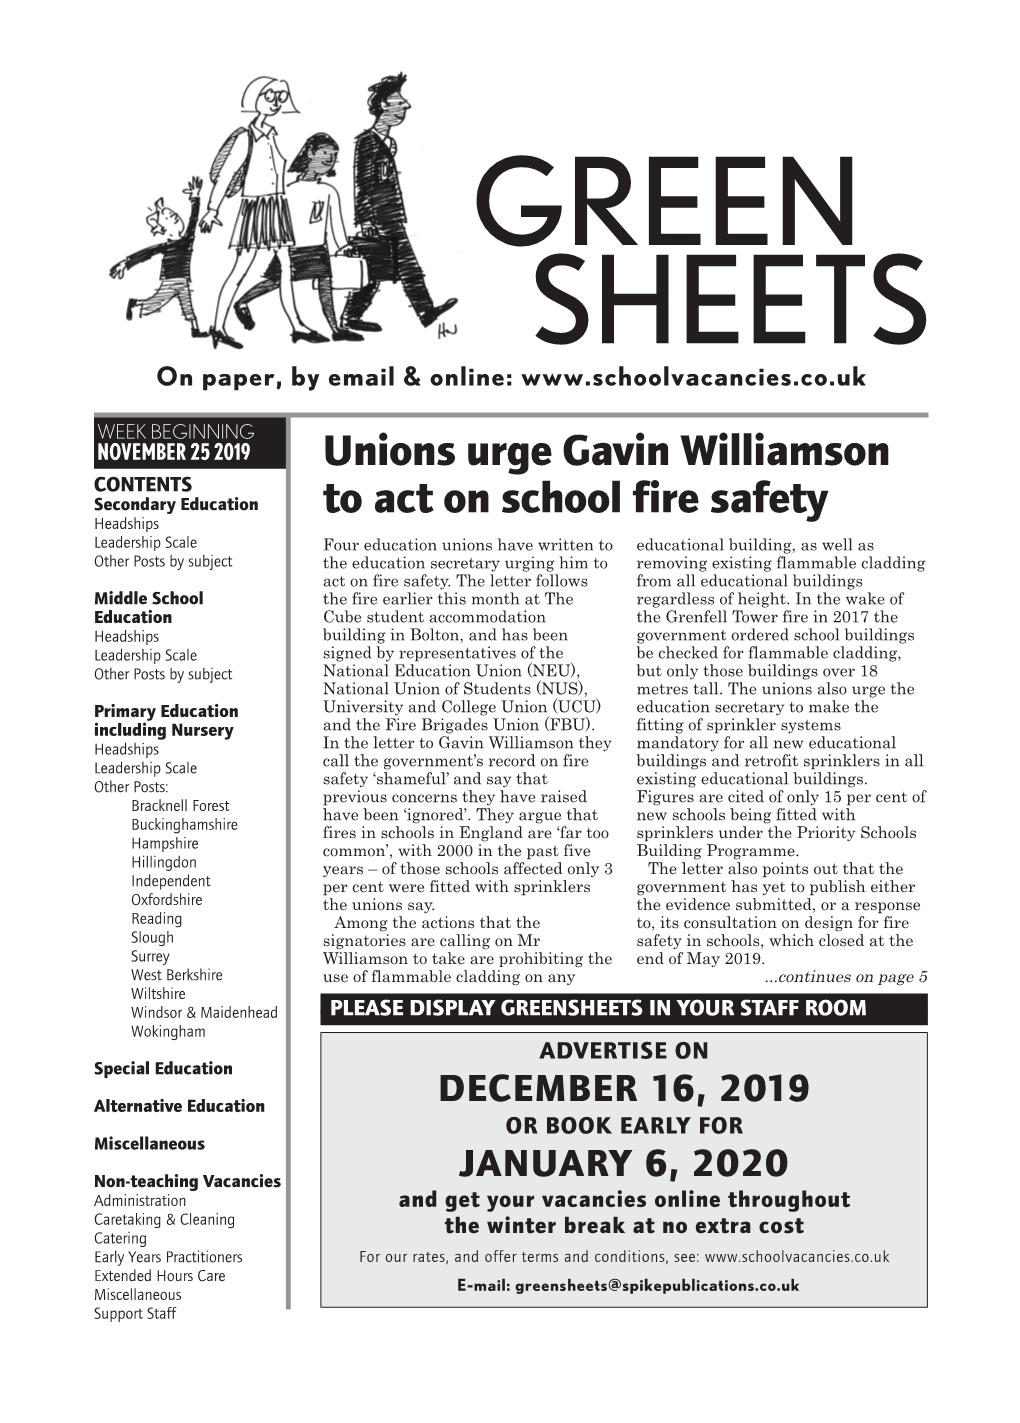 Unions Urge Gavin Williamson to Act on School Fire Safety Continued from Cover Page